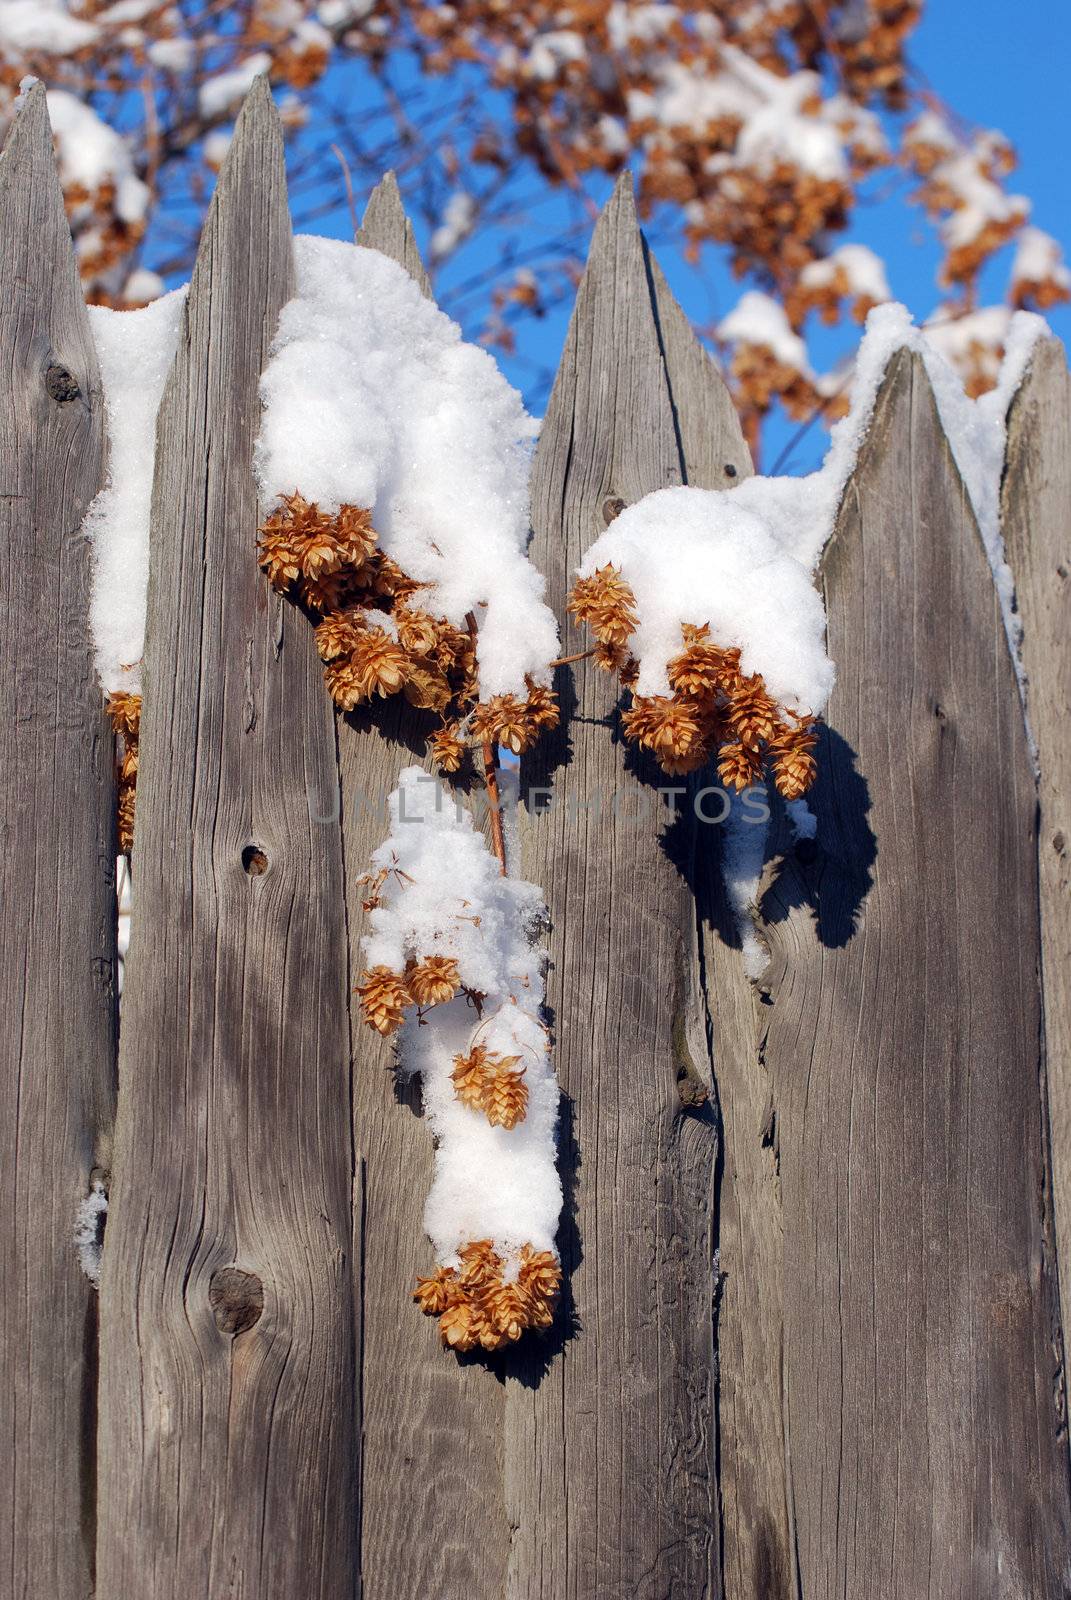 hop cone under the white fluffy snow on the old fence